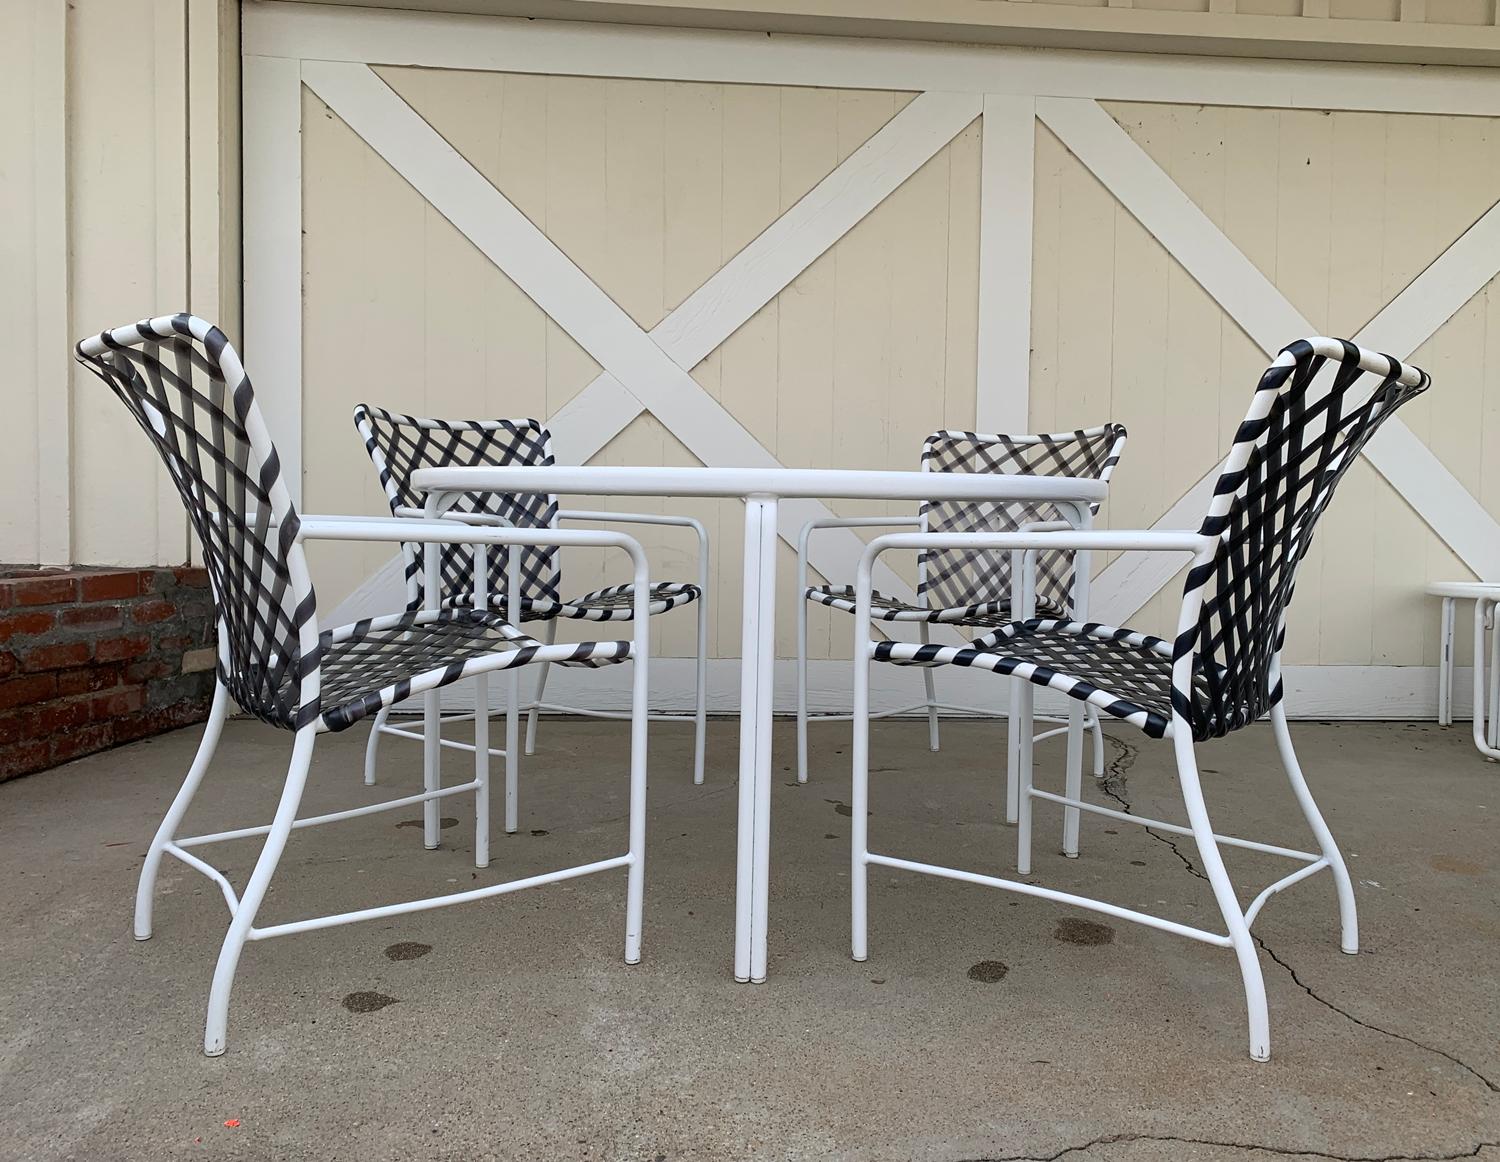 Vintage patio set comprising of 1 round table and 4 armchairs designed and manufactured by Brown Jordan from the Tamiami Collection.
The set is in very good condition, with normal wear which includes nicks and scuffs on metal, the vinyl straps are